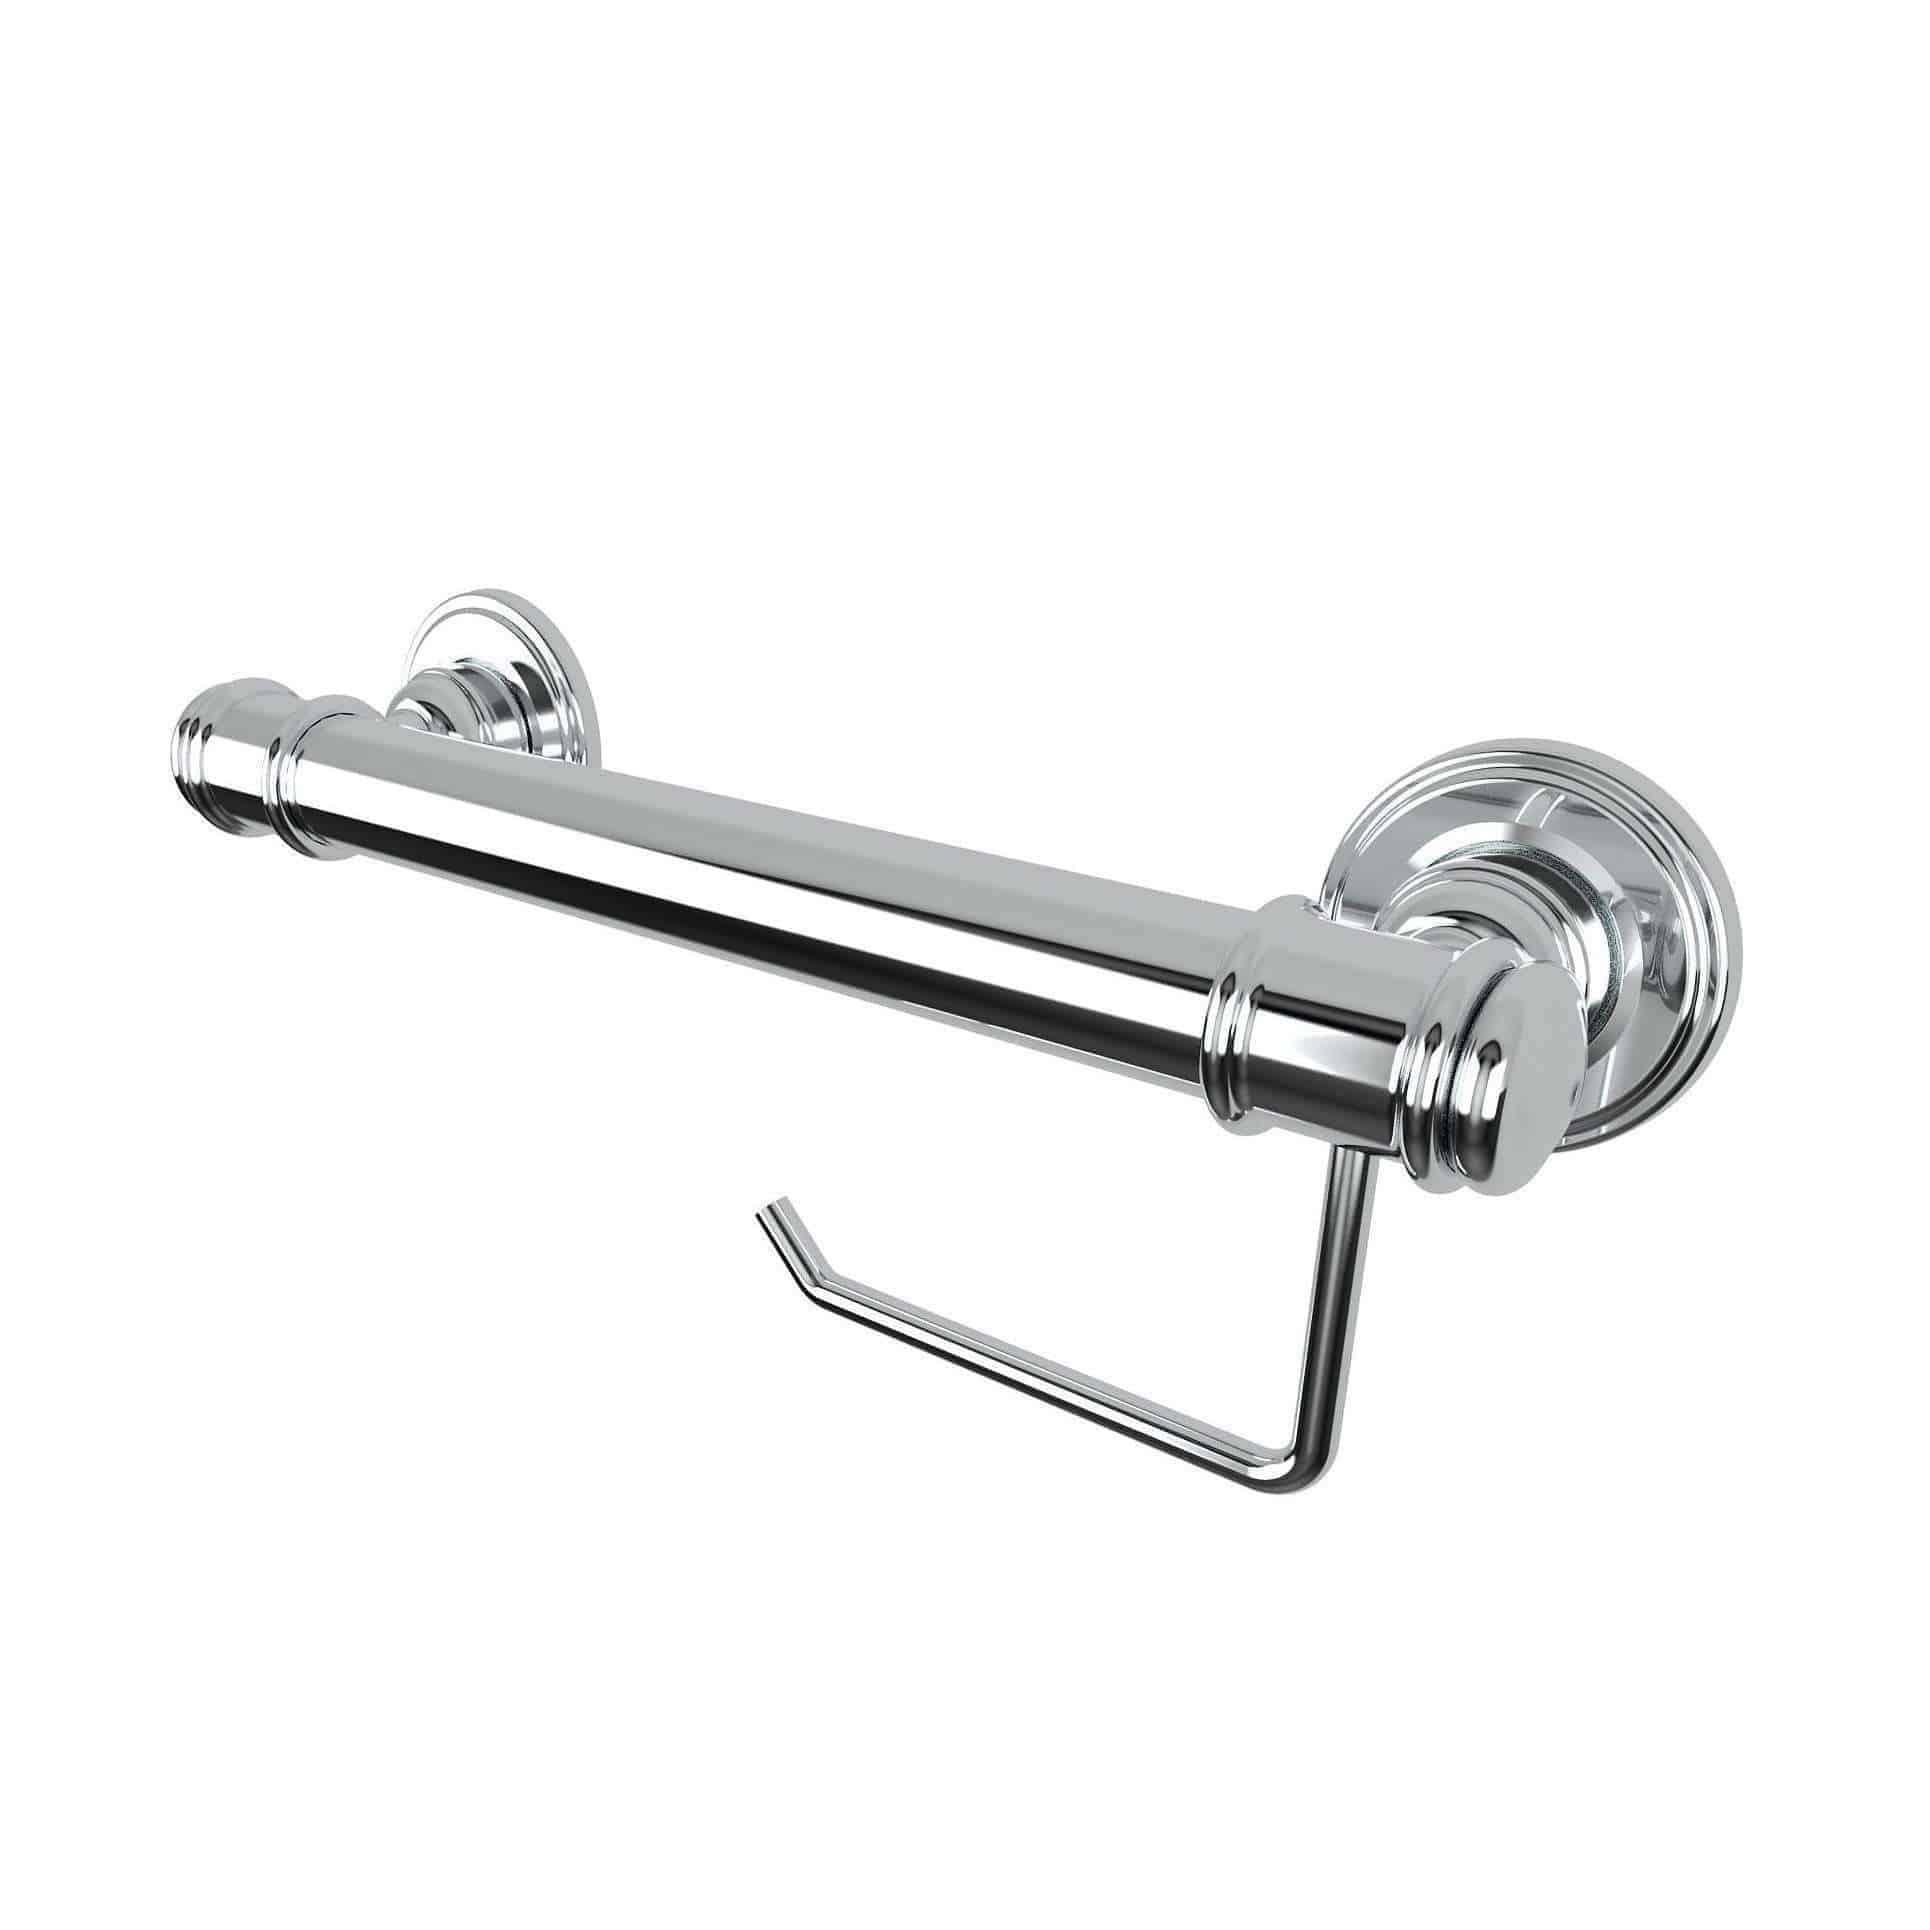 Availcare Glance Toilet Roll Holder And 300mm Rail Chrome - Burdens Plumbing